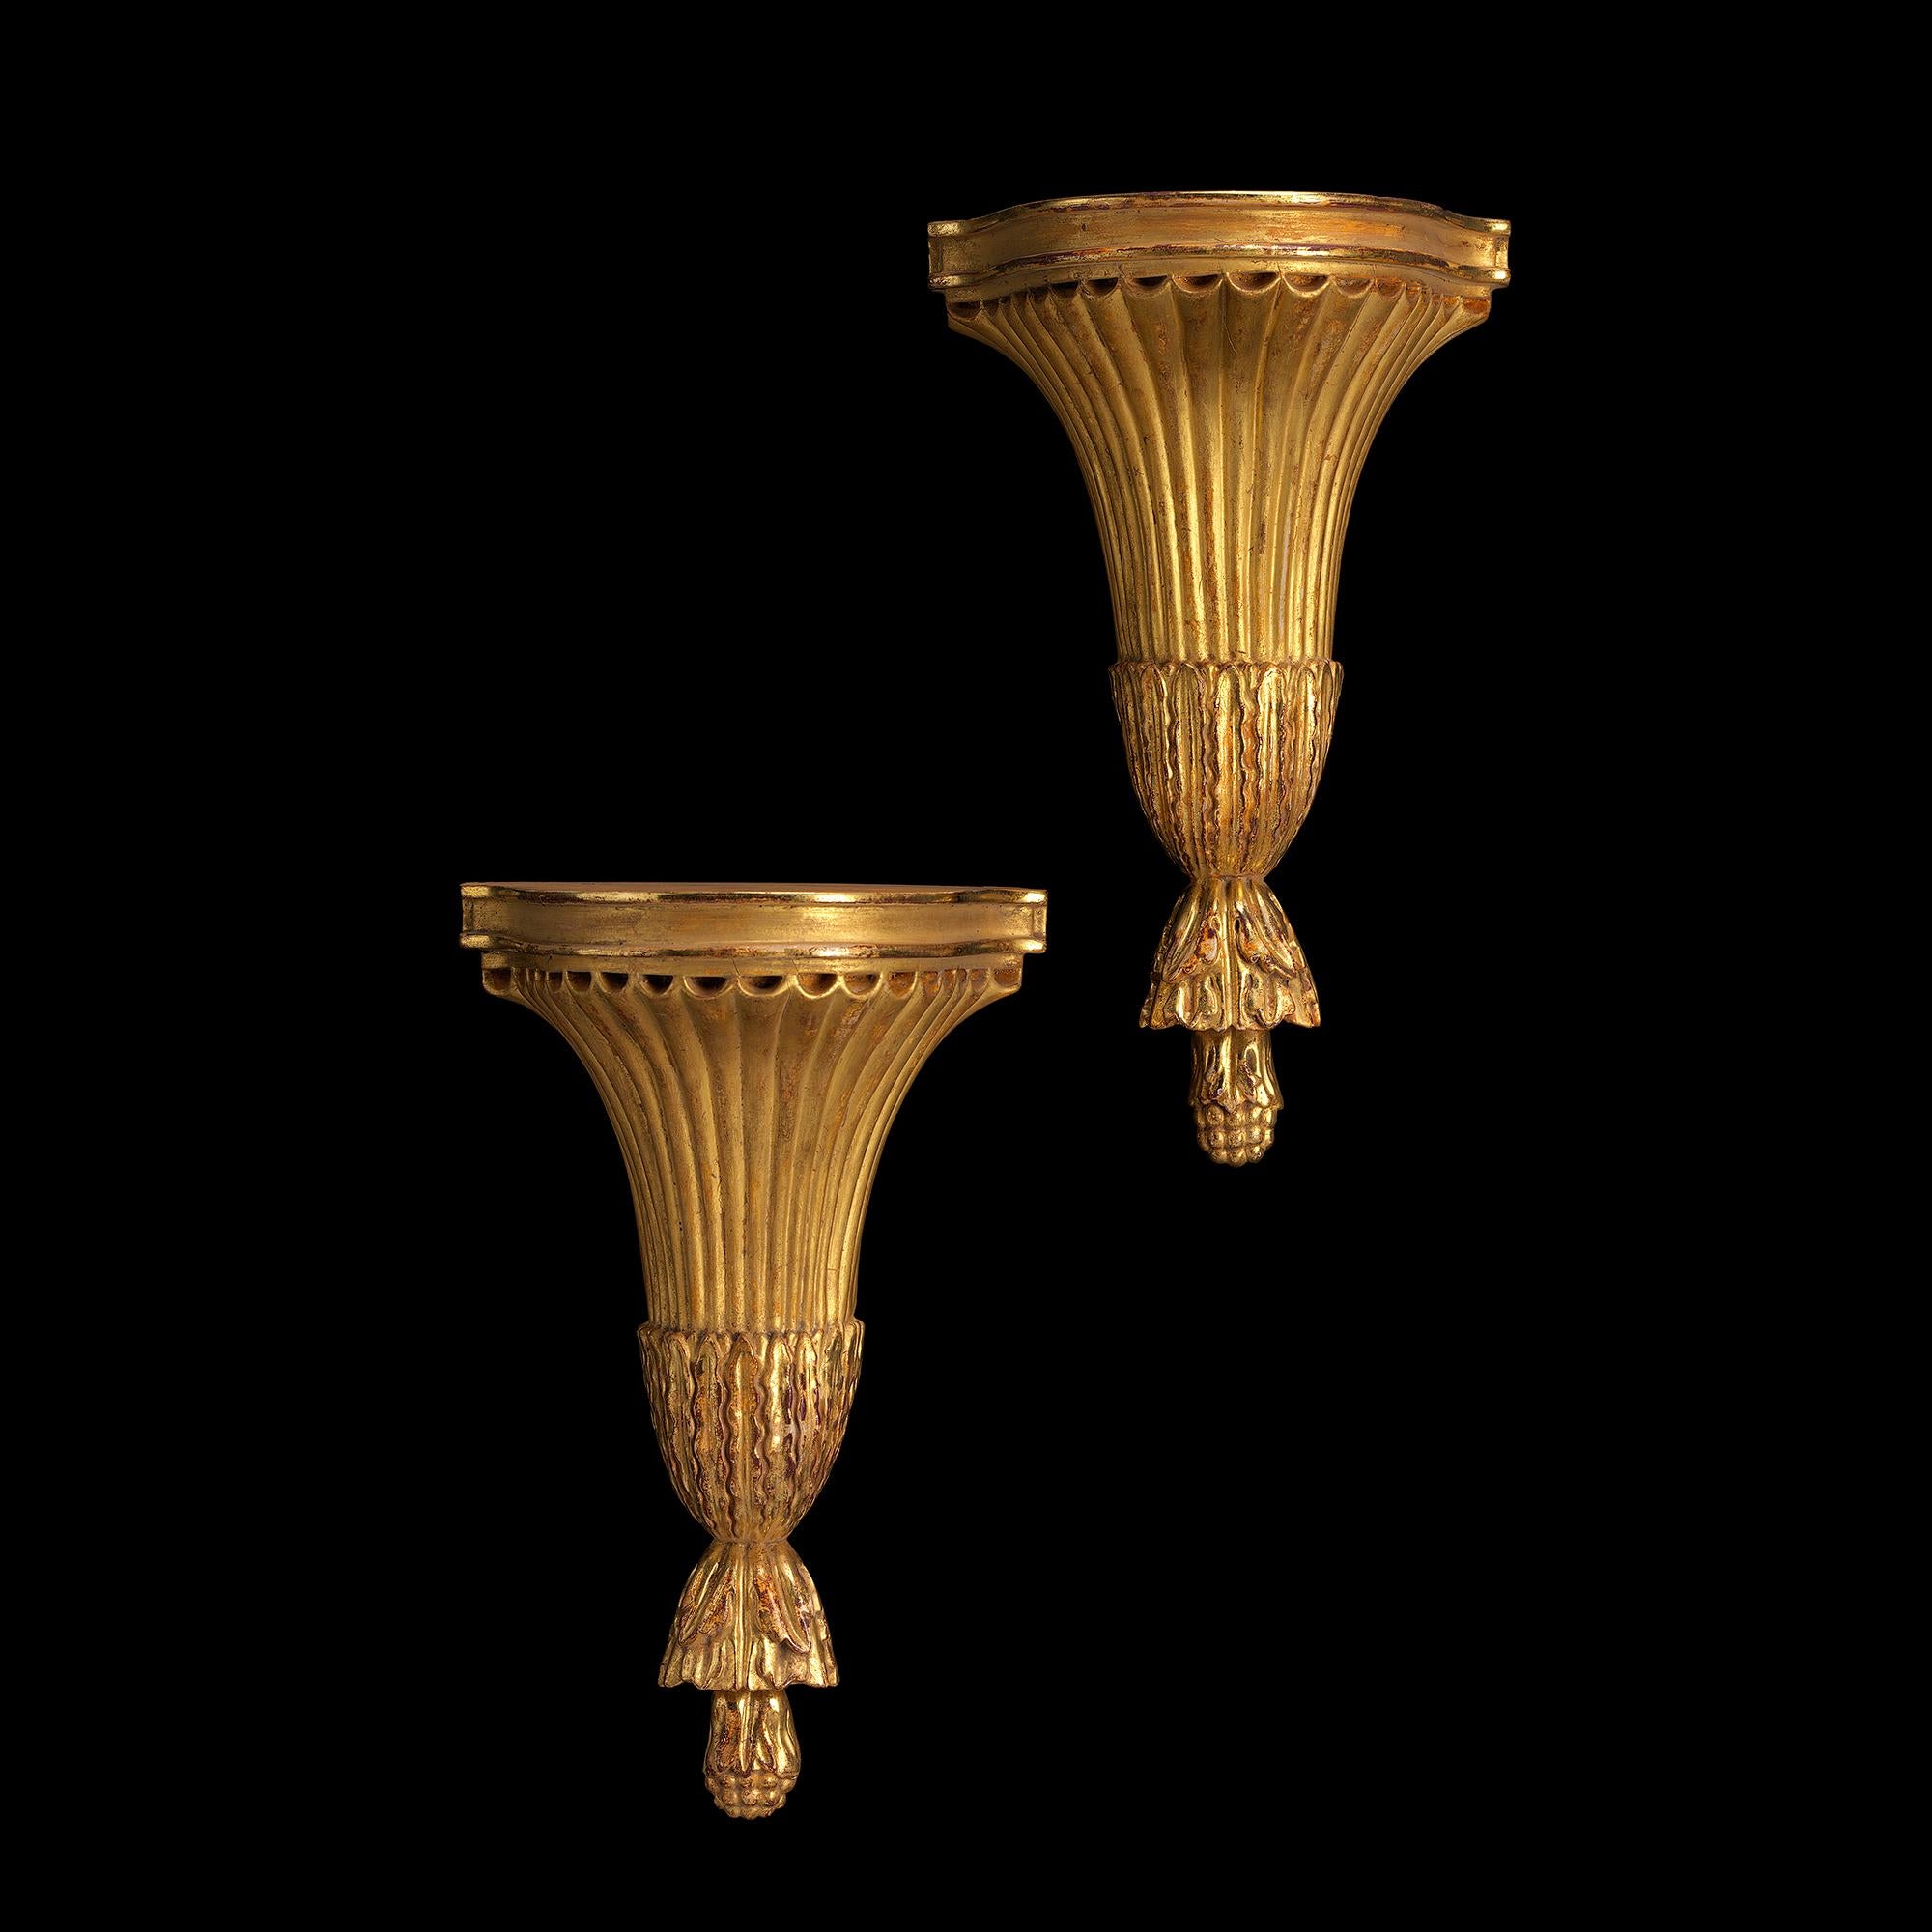 This late 18th century design carved and gilded wood wall bracket has a shaped and double moulded shelf and a tapered fan fluted body. The base is decorated with a lotus leaf collar above a leaf carved and seed pod finial. Available either as a